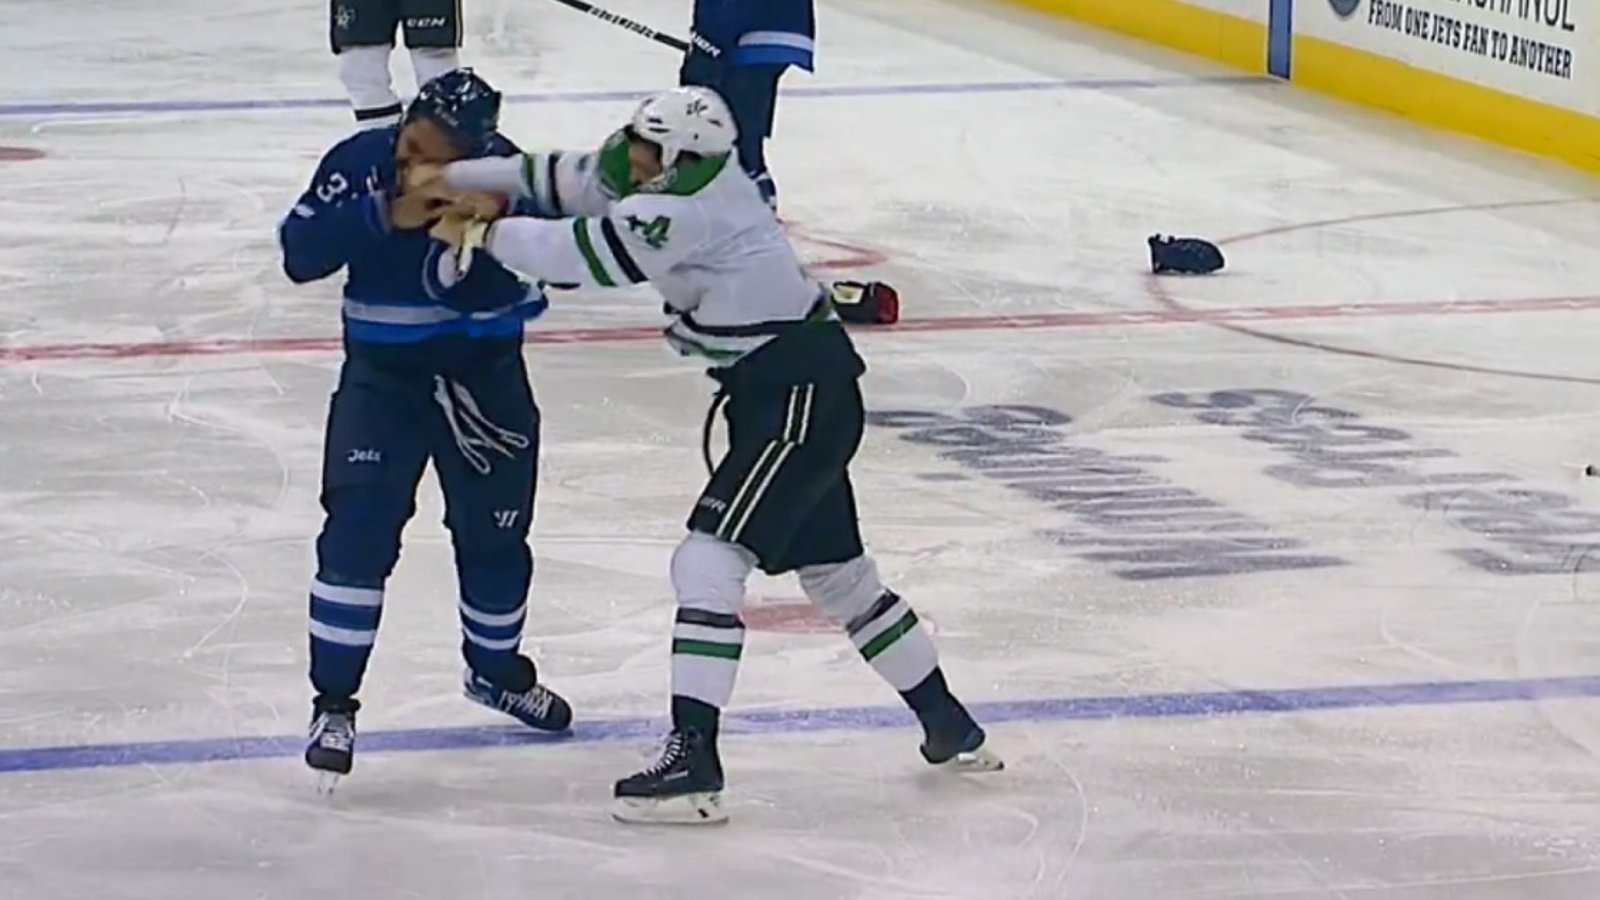 Breaking: Dustin Byfuglien &amp; Jamie Benn drop the gloves and throw heavy punches.